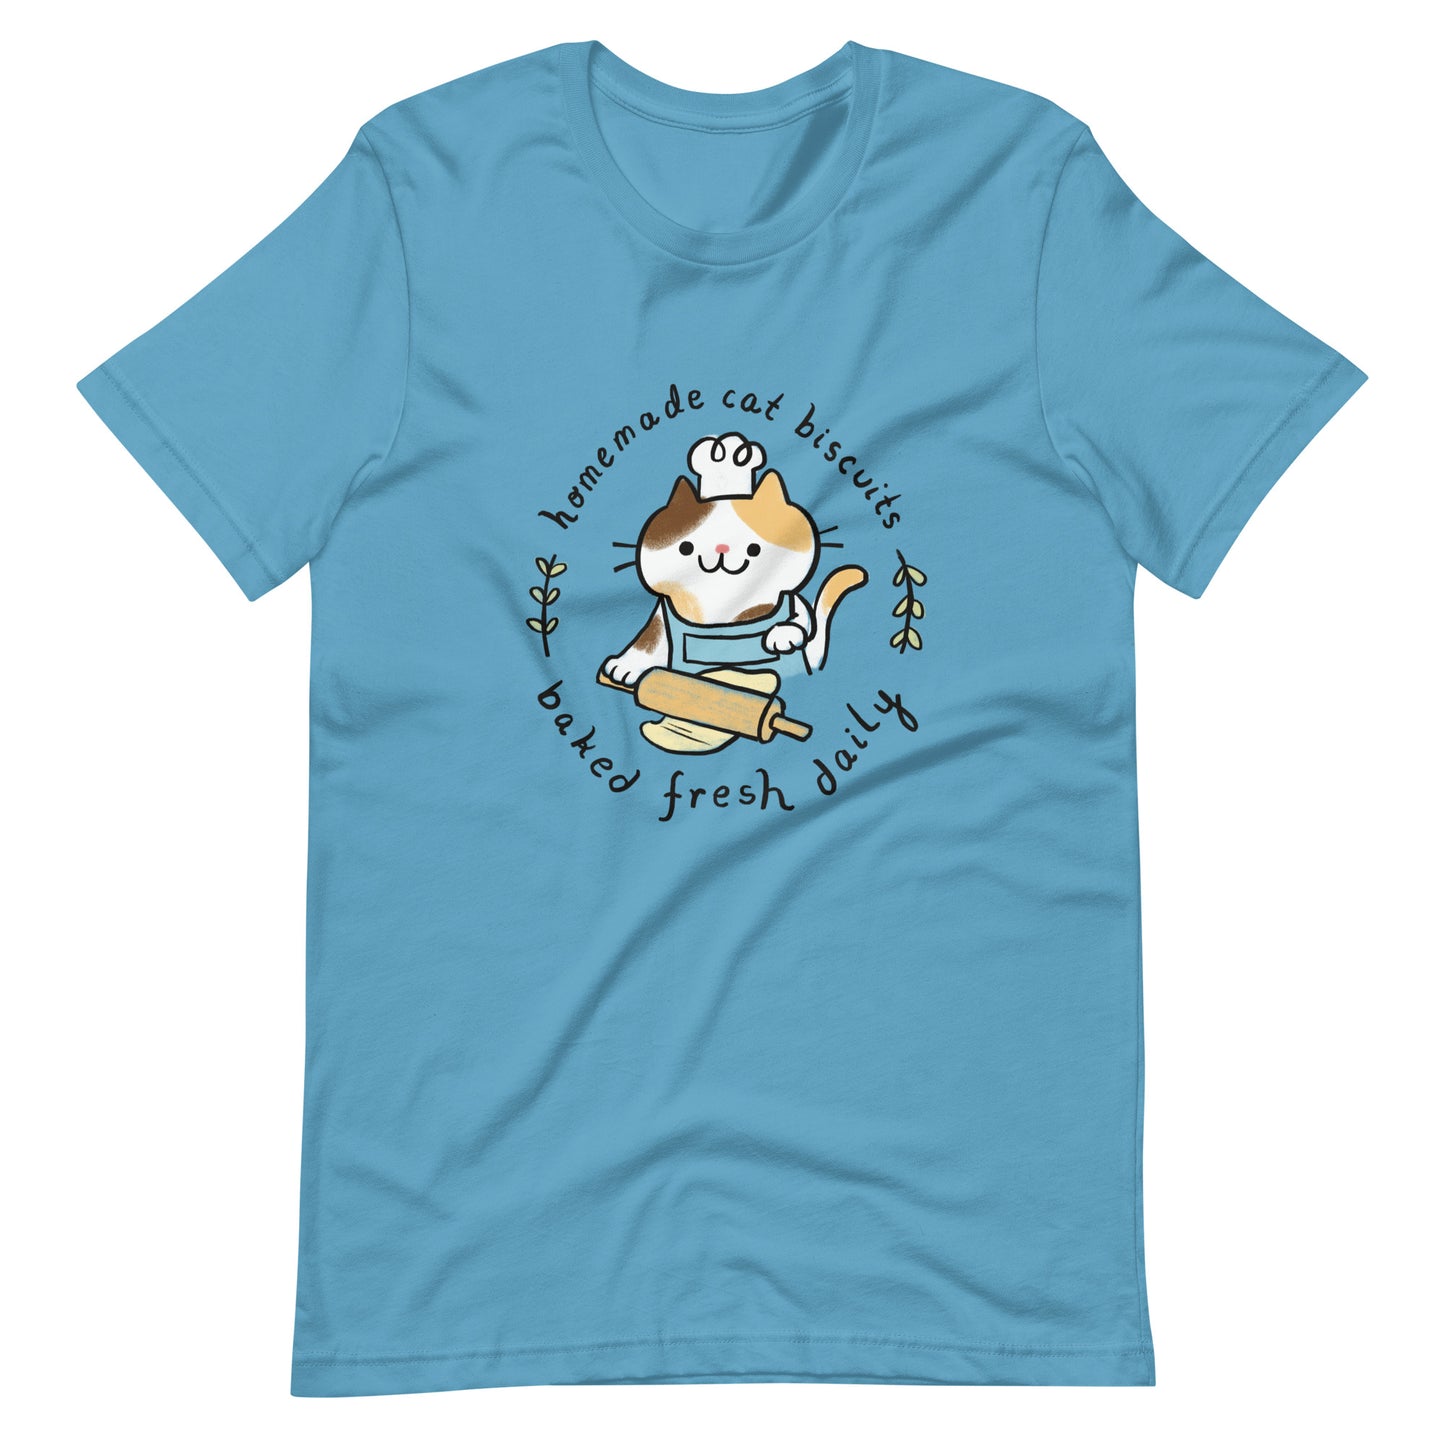 Homemade Cat Biscuits Baked Fresh Daily Unisex t-shirt XS - 4XL